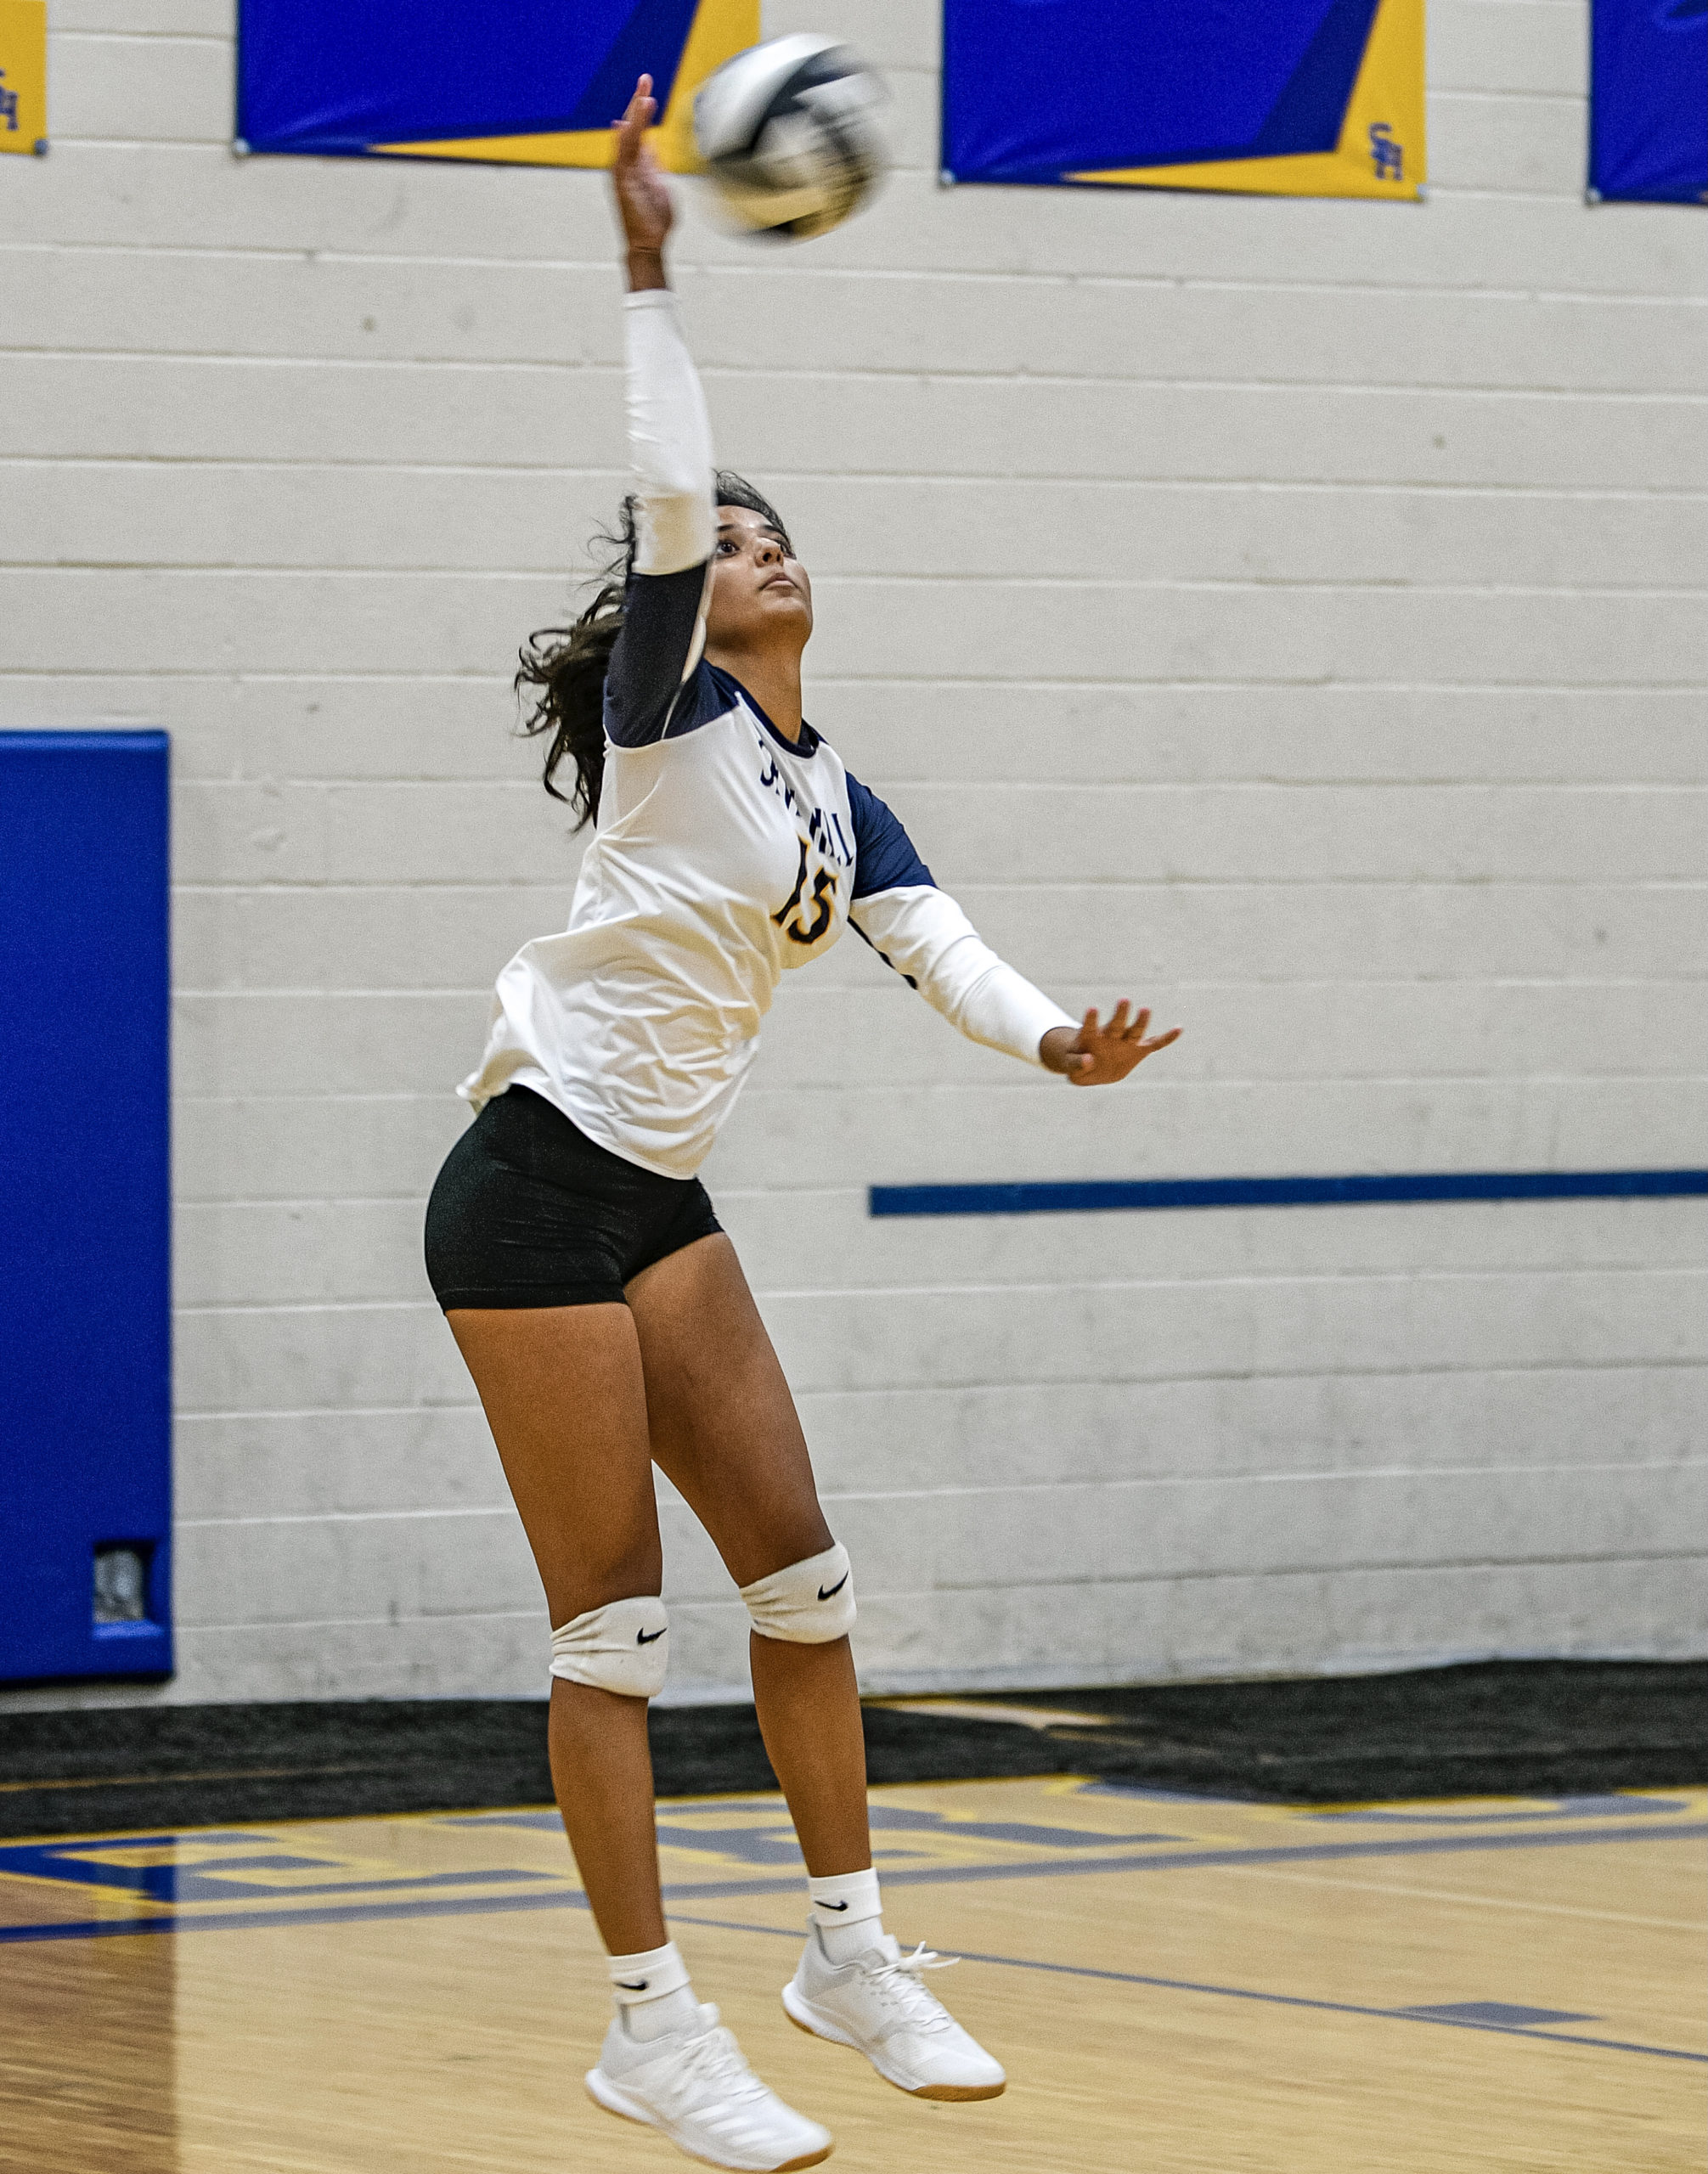 Senior named Volleyball Player of the Year - The Buzz - Seven Hills School